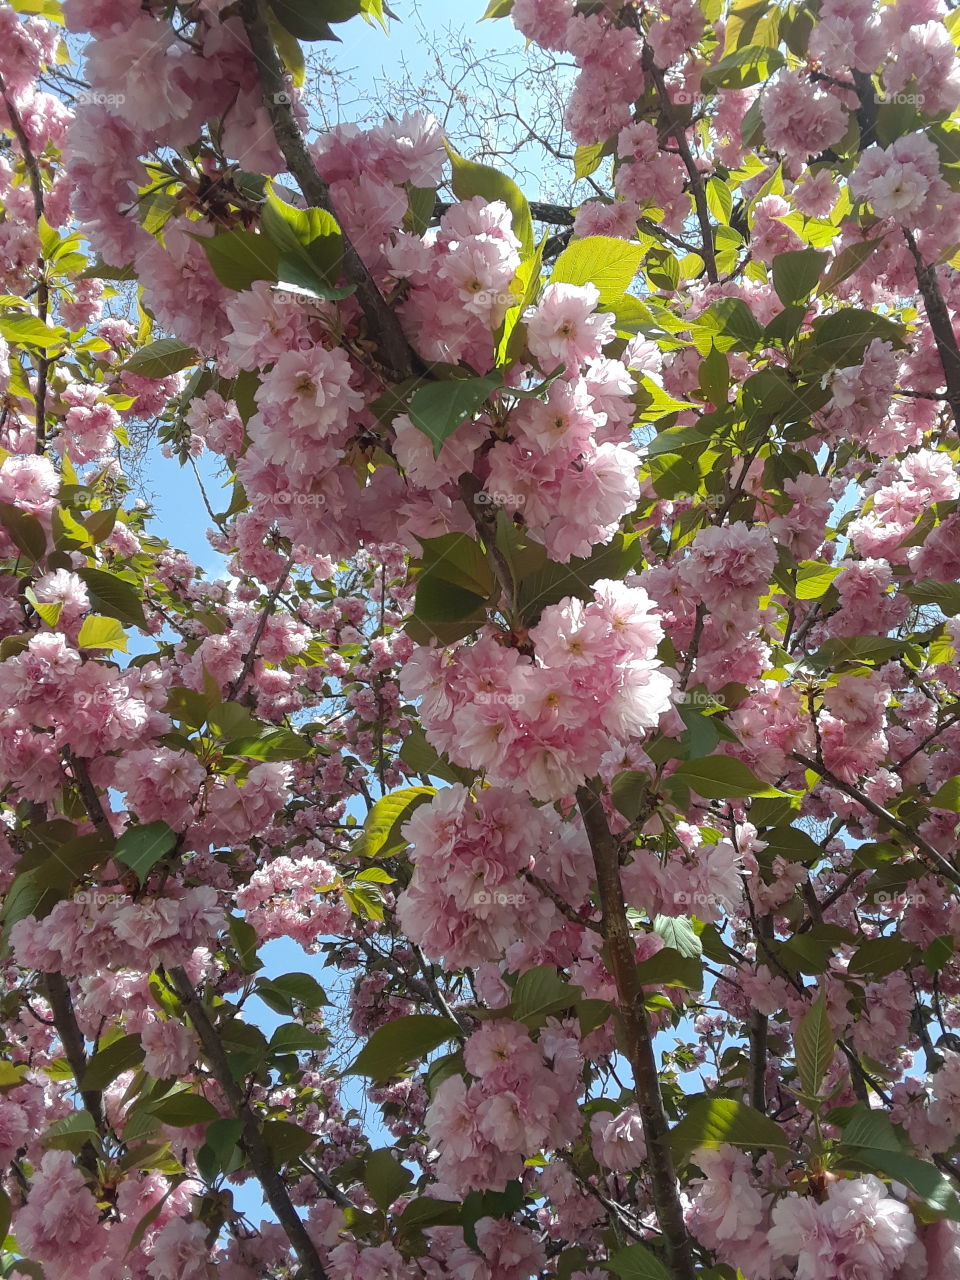 Beautiful clusters of blooms on a tree.